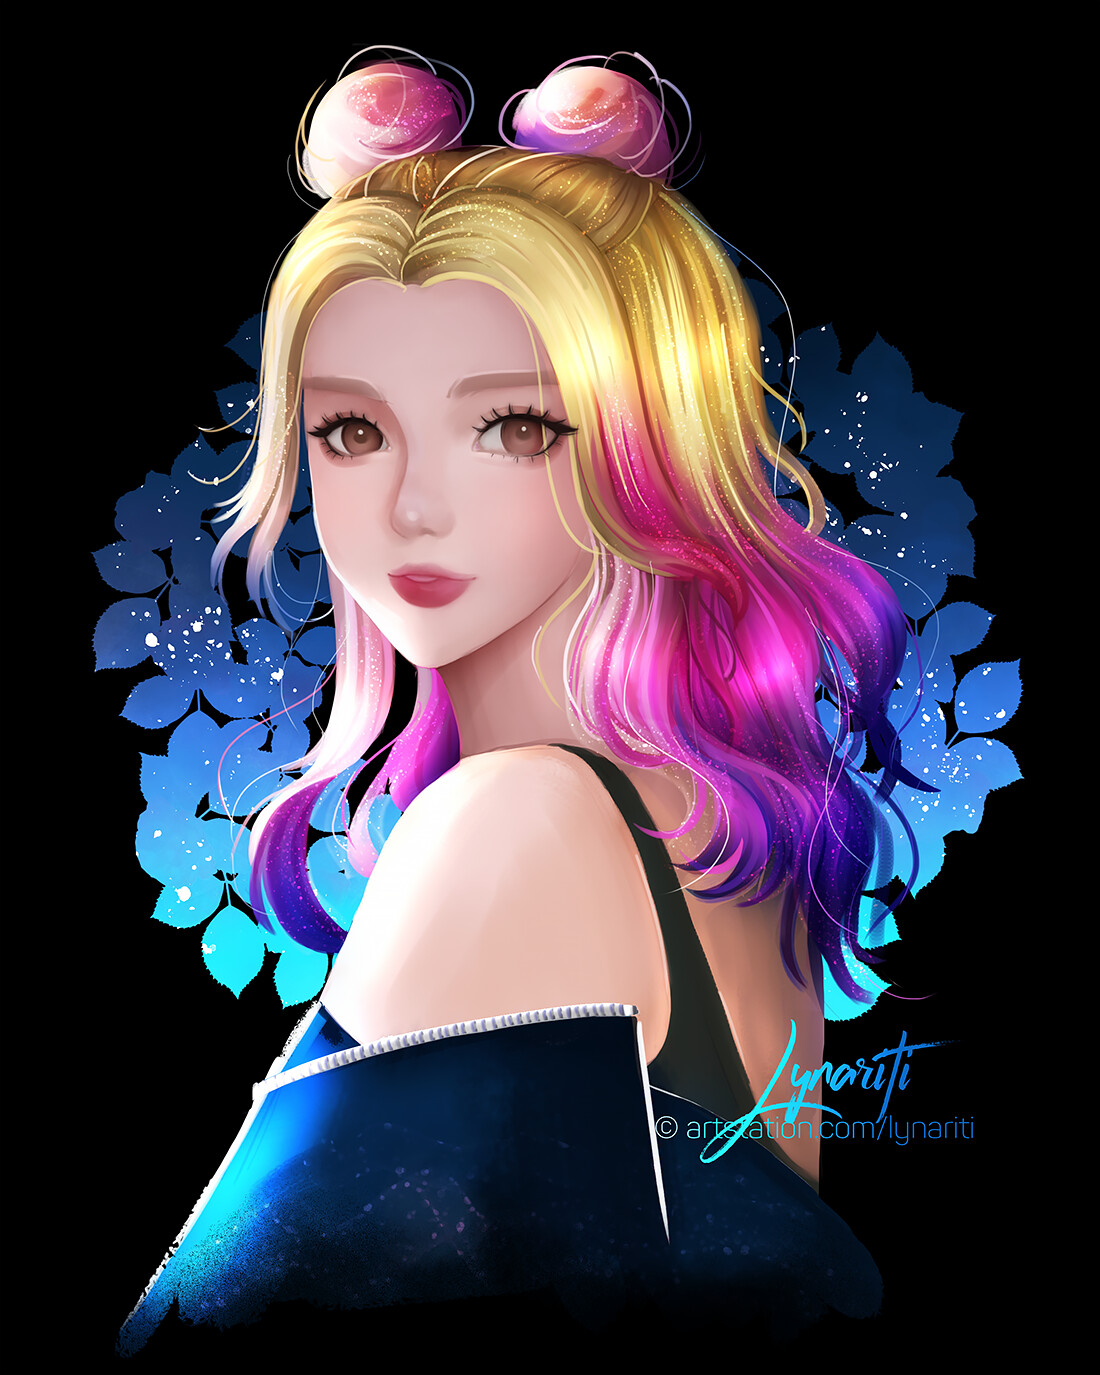 Draw anime or chibi icon for your profile picture by Geramine | Fiverr